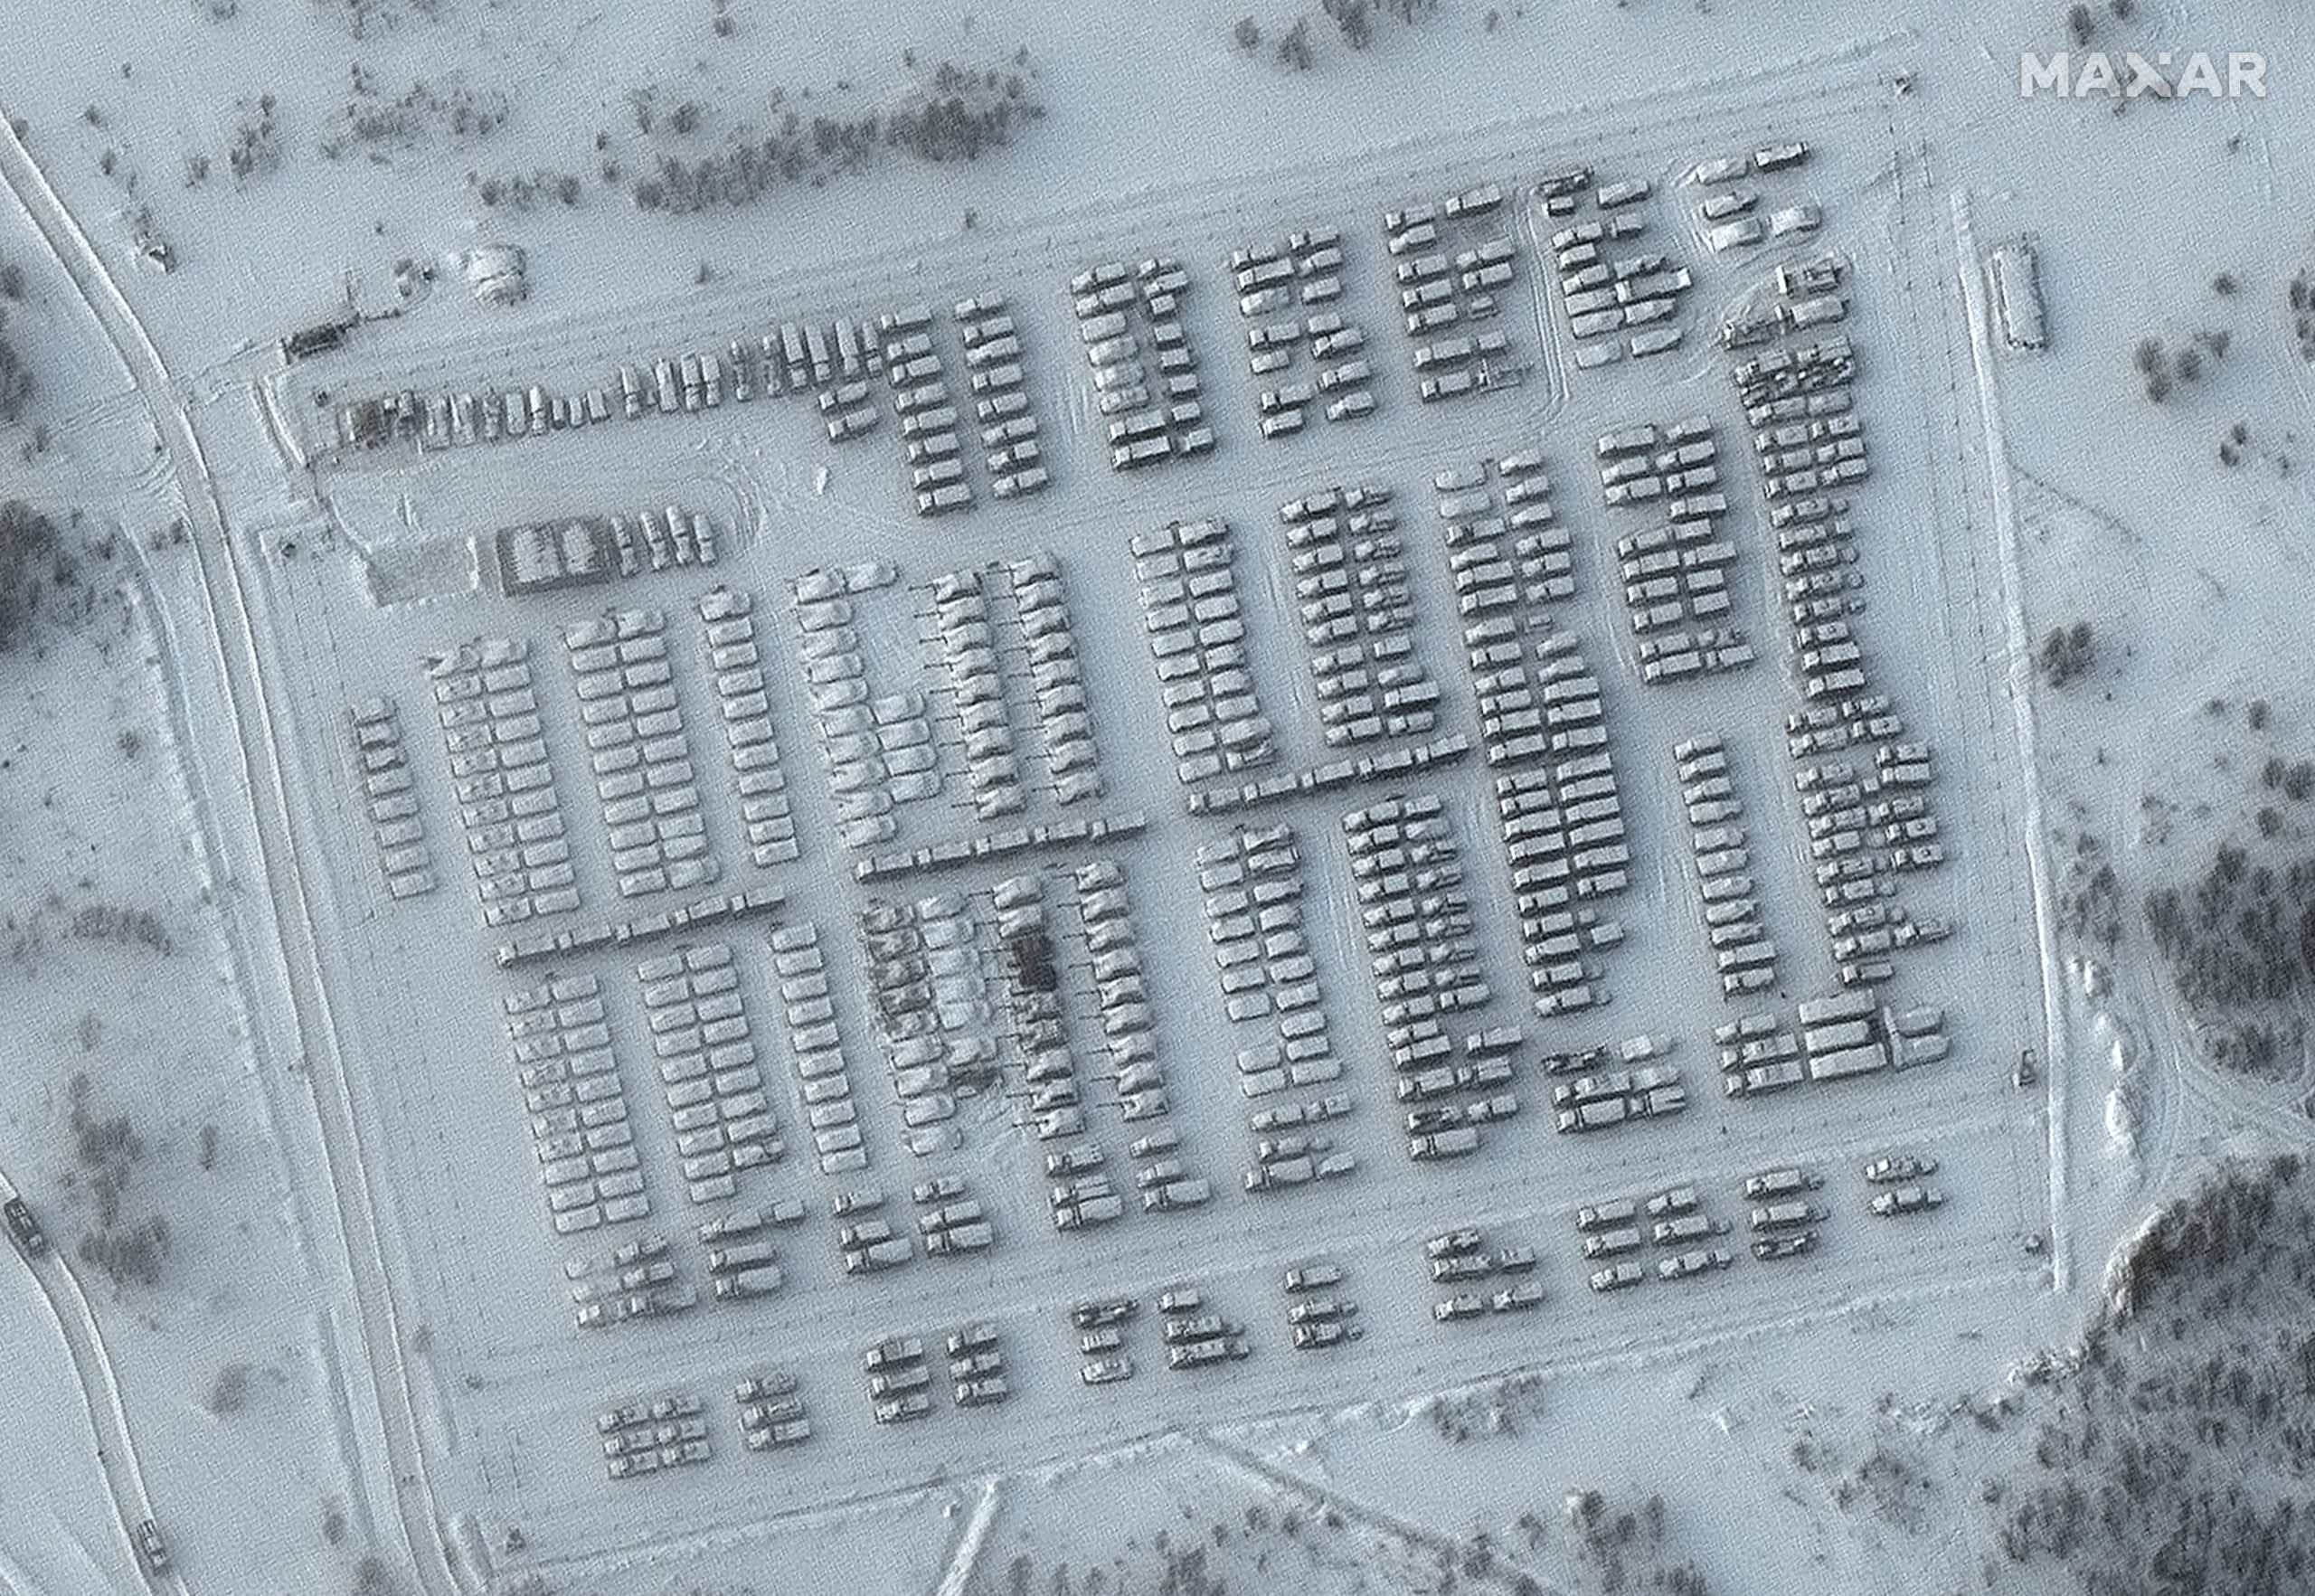 View of Russian battle groups in Yelnya, Russia on Jan. 19, 2022.